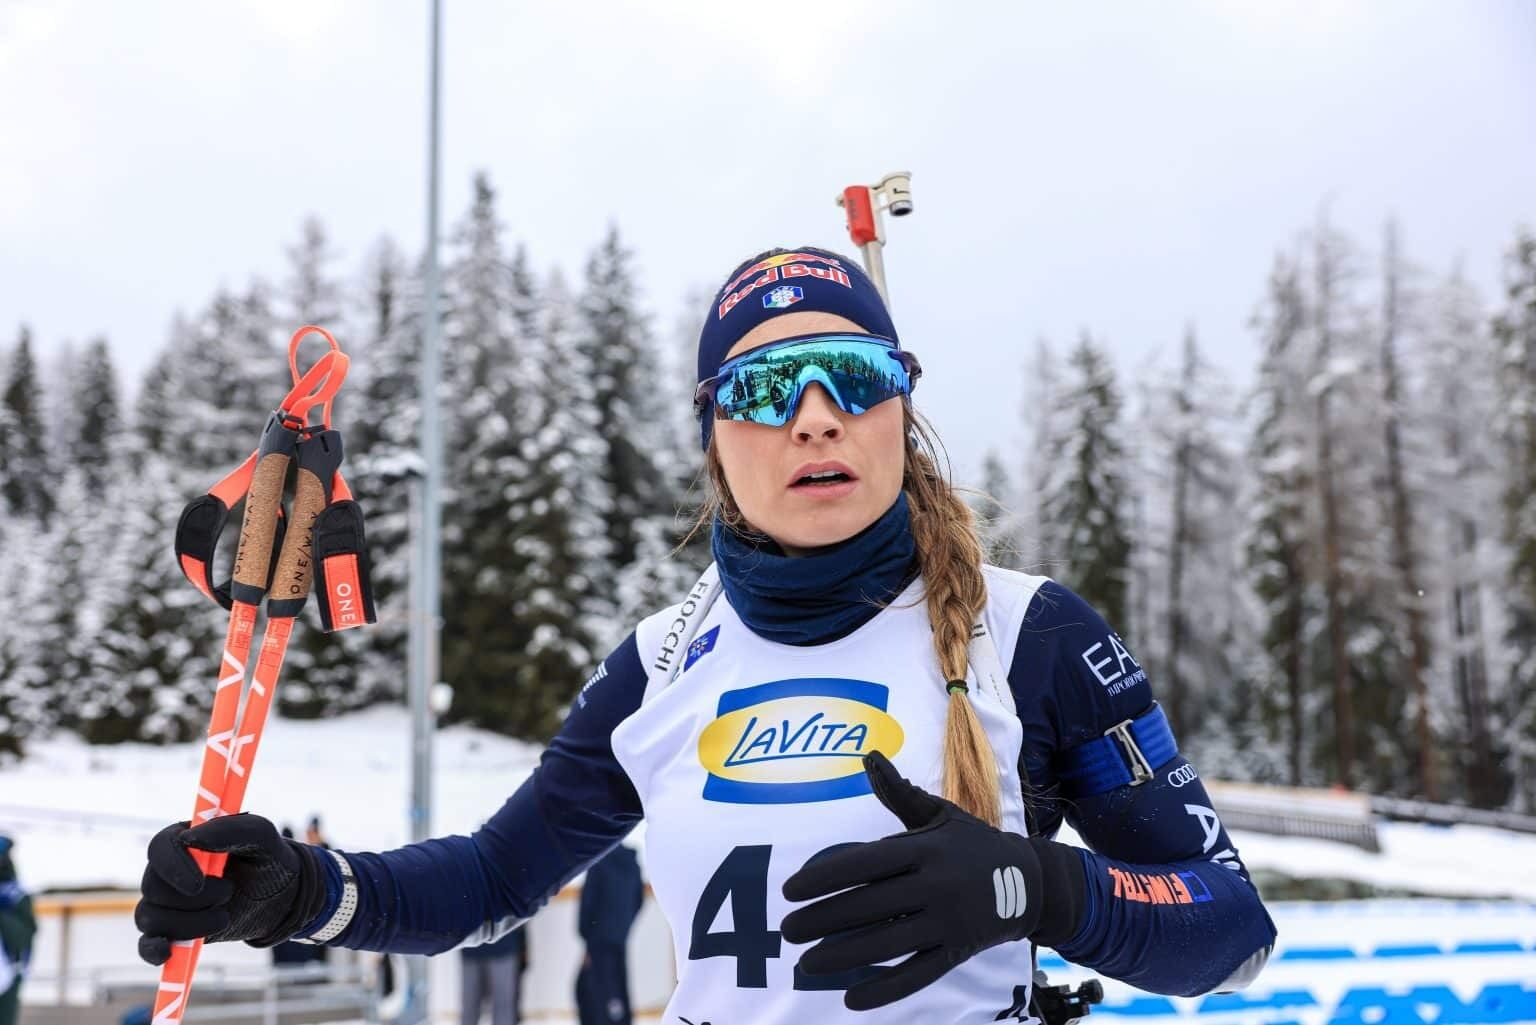 The three-time world biathlon champion refused to compete at the World Cup, withdrawing from the 2023 stages